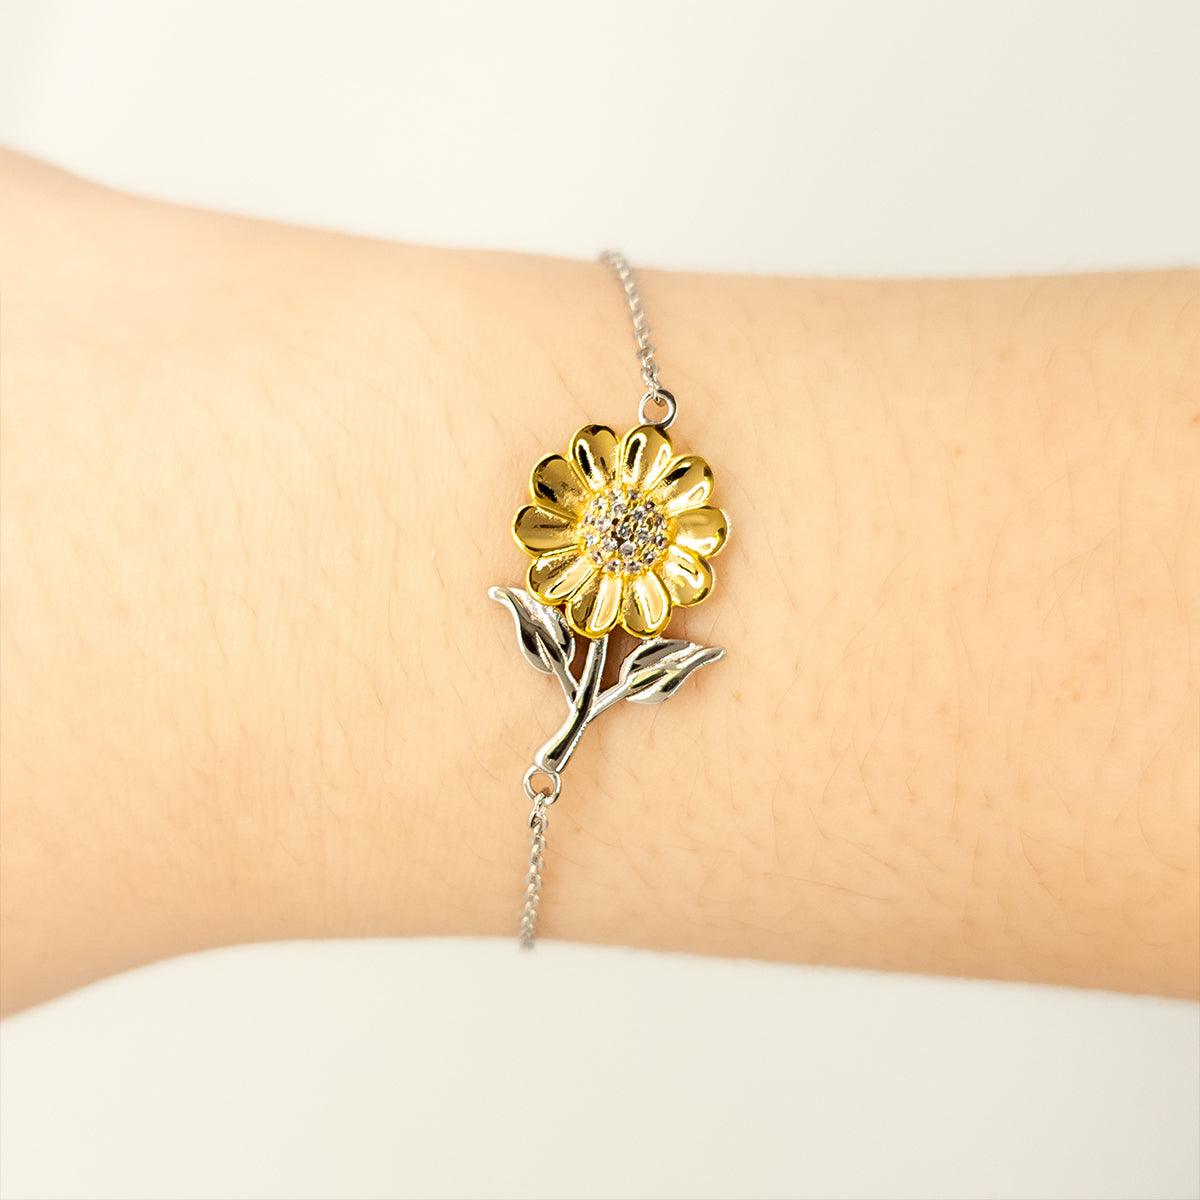 Remarkable Historian Gifts, Your dedication and hard work, Inspirational Birthday Christmas Unique Sunflower Bracelet For Historian, Coworkers, Men, Women, Friends - Mallard Moon Gift Shop